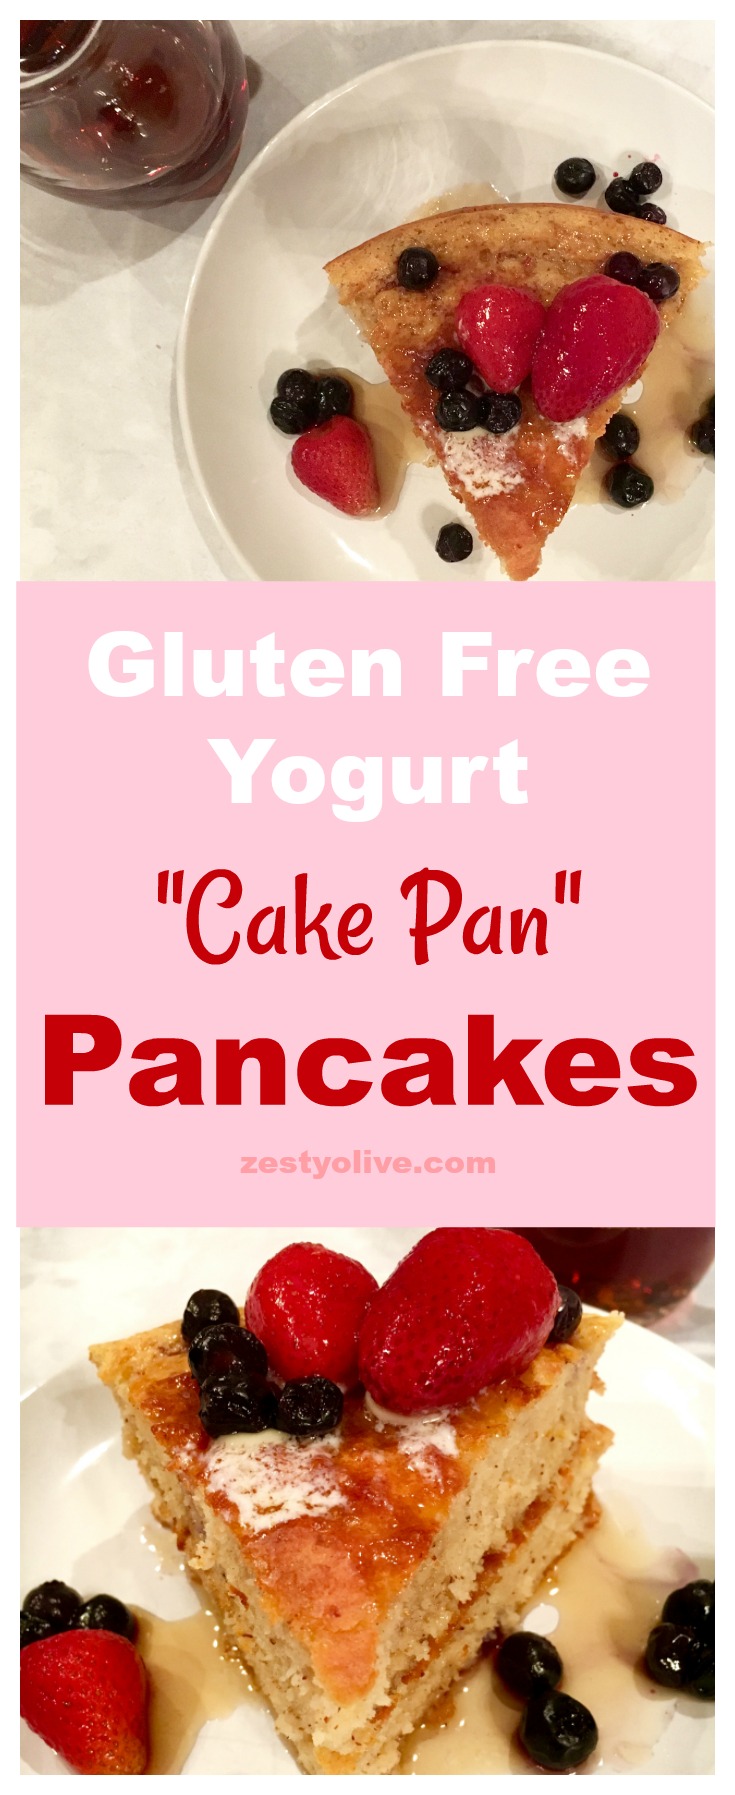 Don't want to stand over a hot griddle flipping and waiting for your pancakes? Try my simple oven bake method and give these healthy Gluten Free Yogurt Cake Pan Pancakes a try today. This is possibly the easiest way to make pancakes!